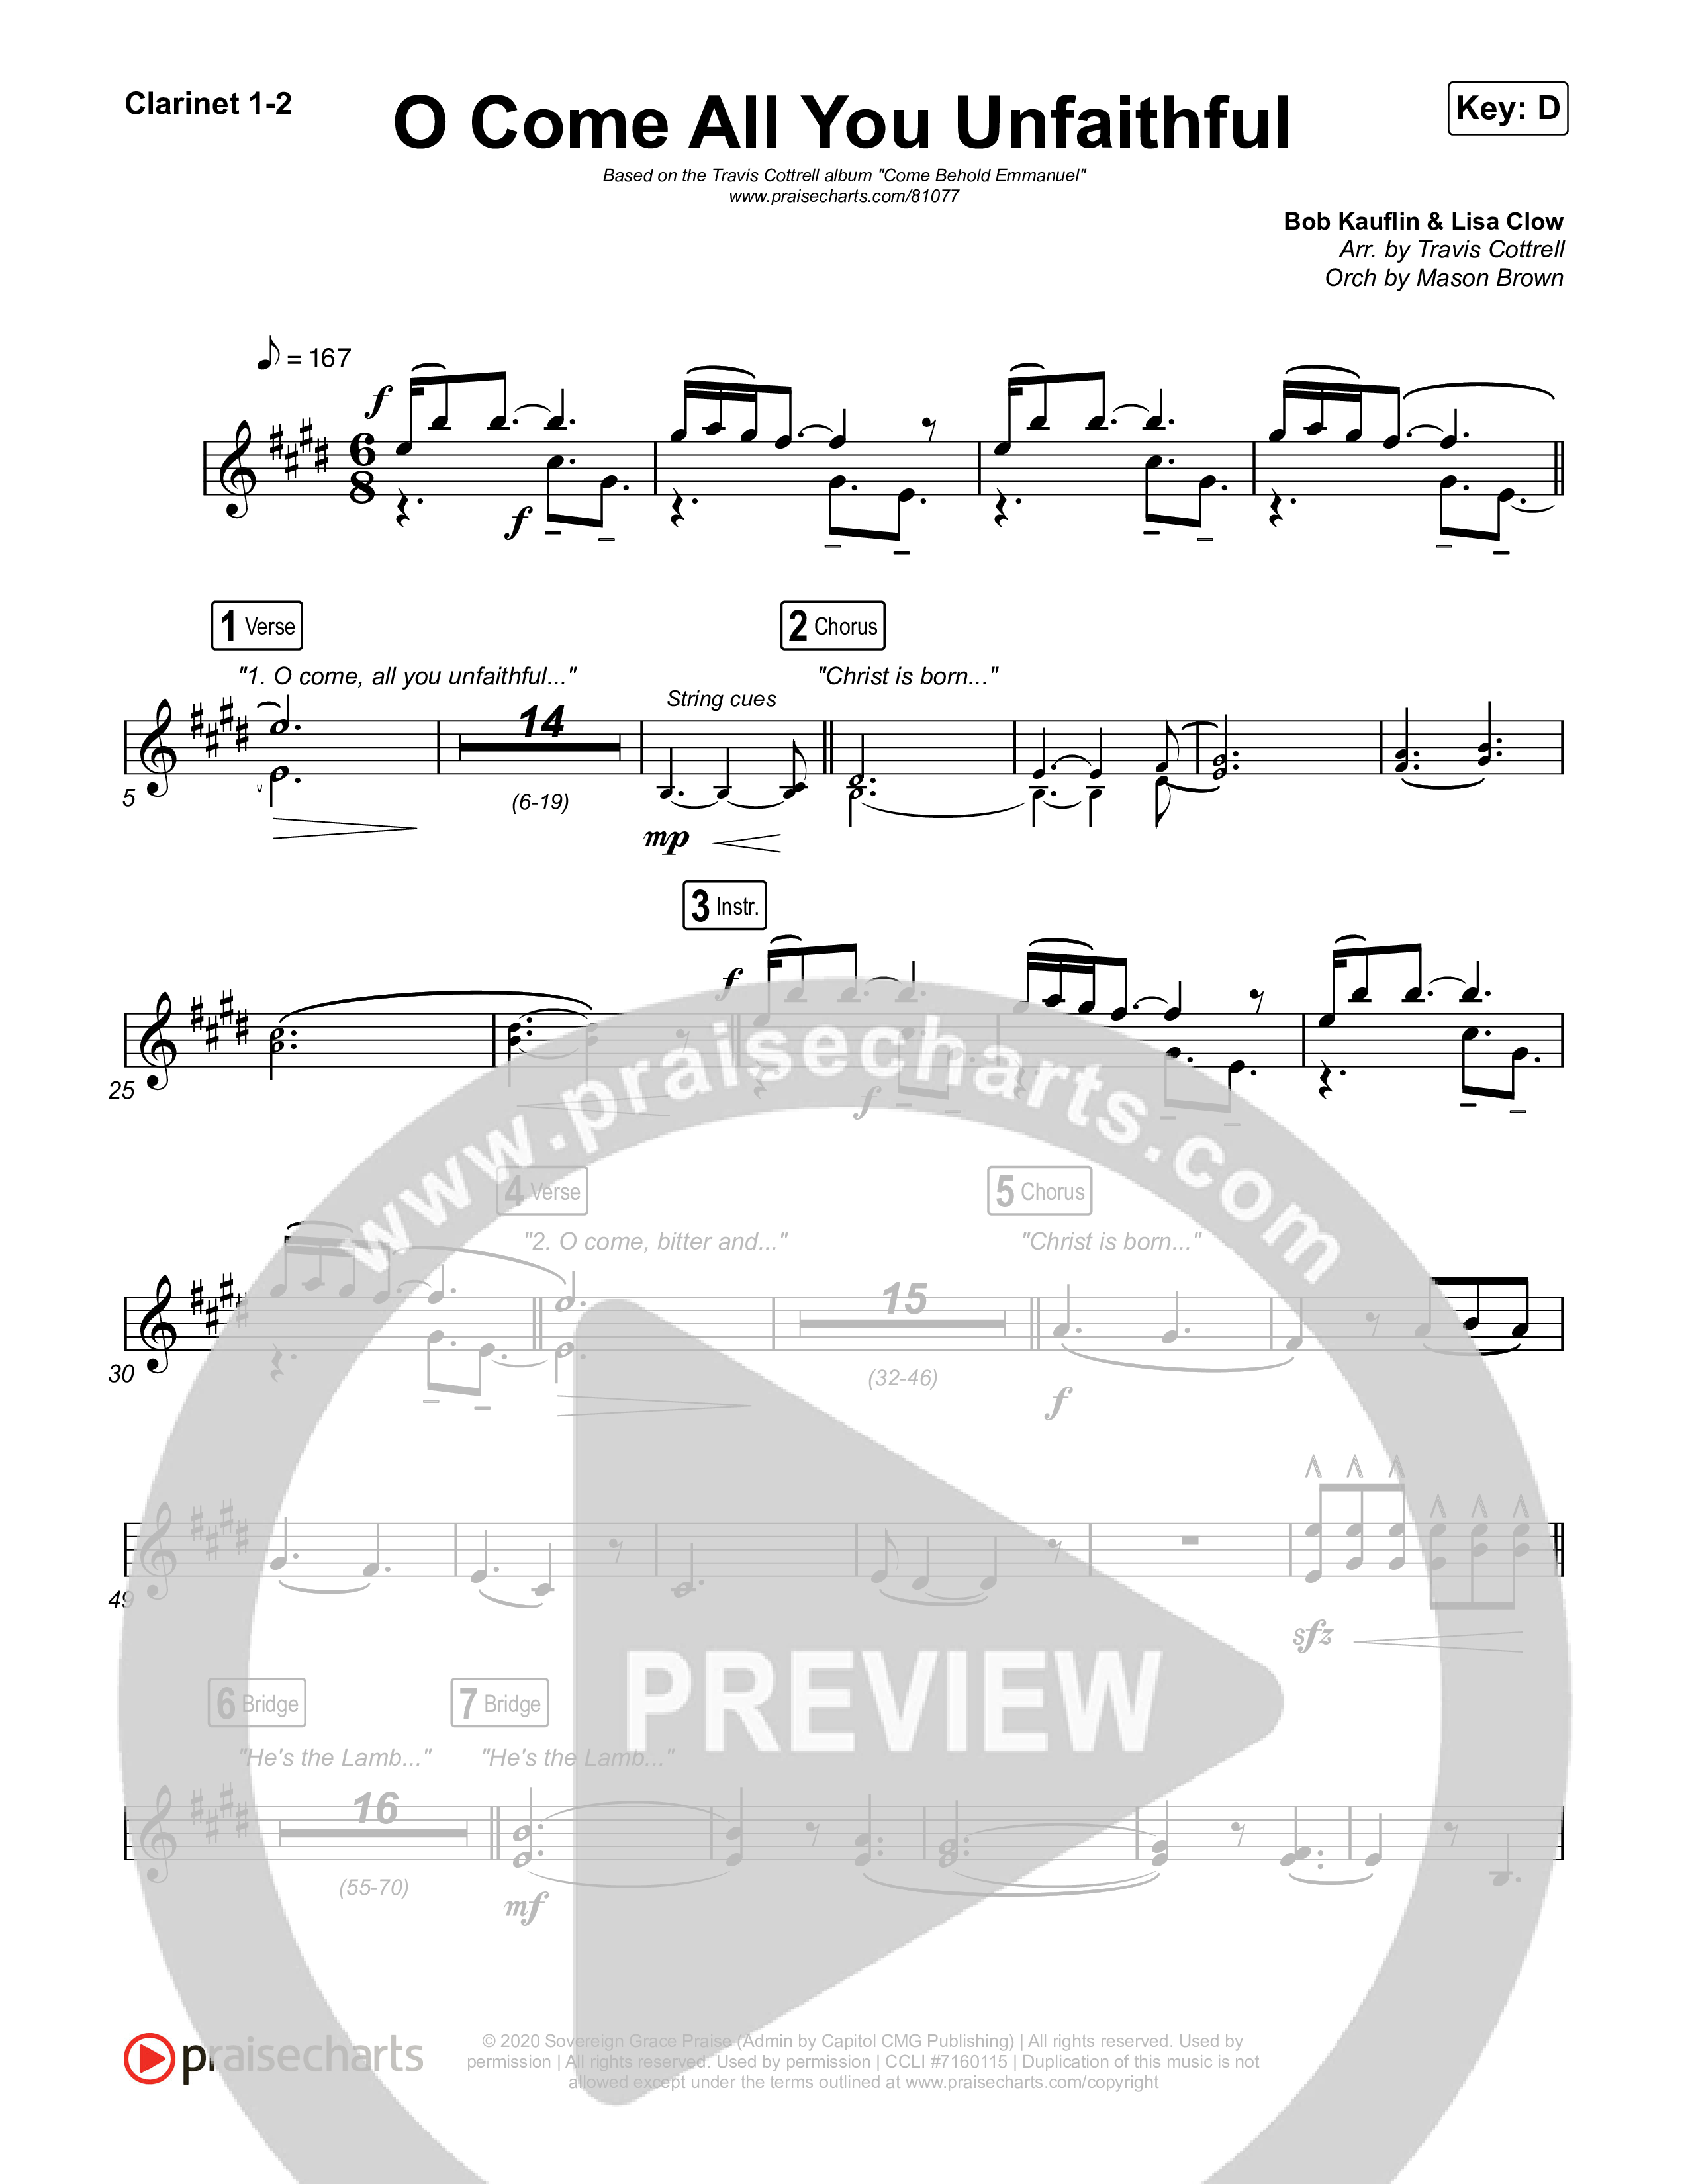 O Come All You Unfaithful Clarinet 1/2 (Brooke Voland / Arr. Travis Cottrell / Orch. Mason Brown)